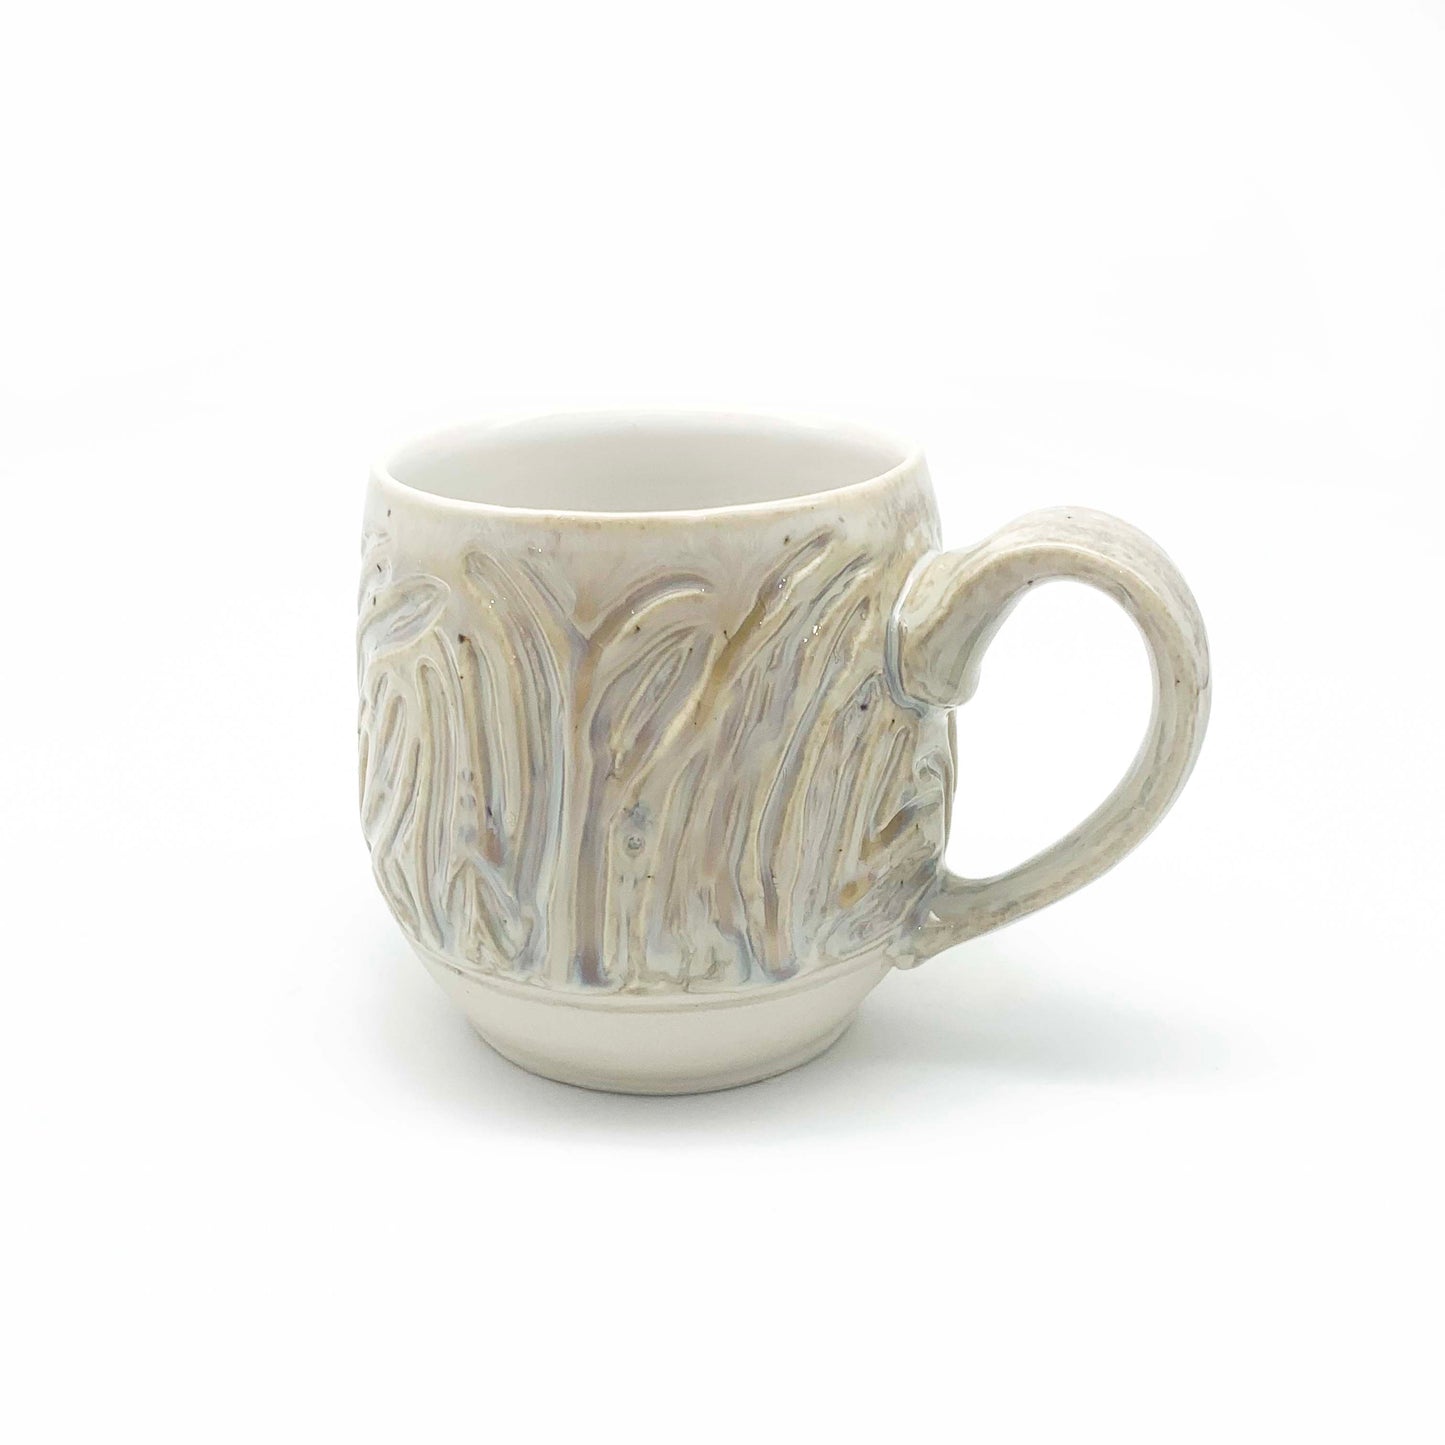 A Drink Well Collection : Iridescent Carved Mug